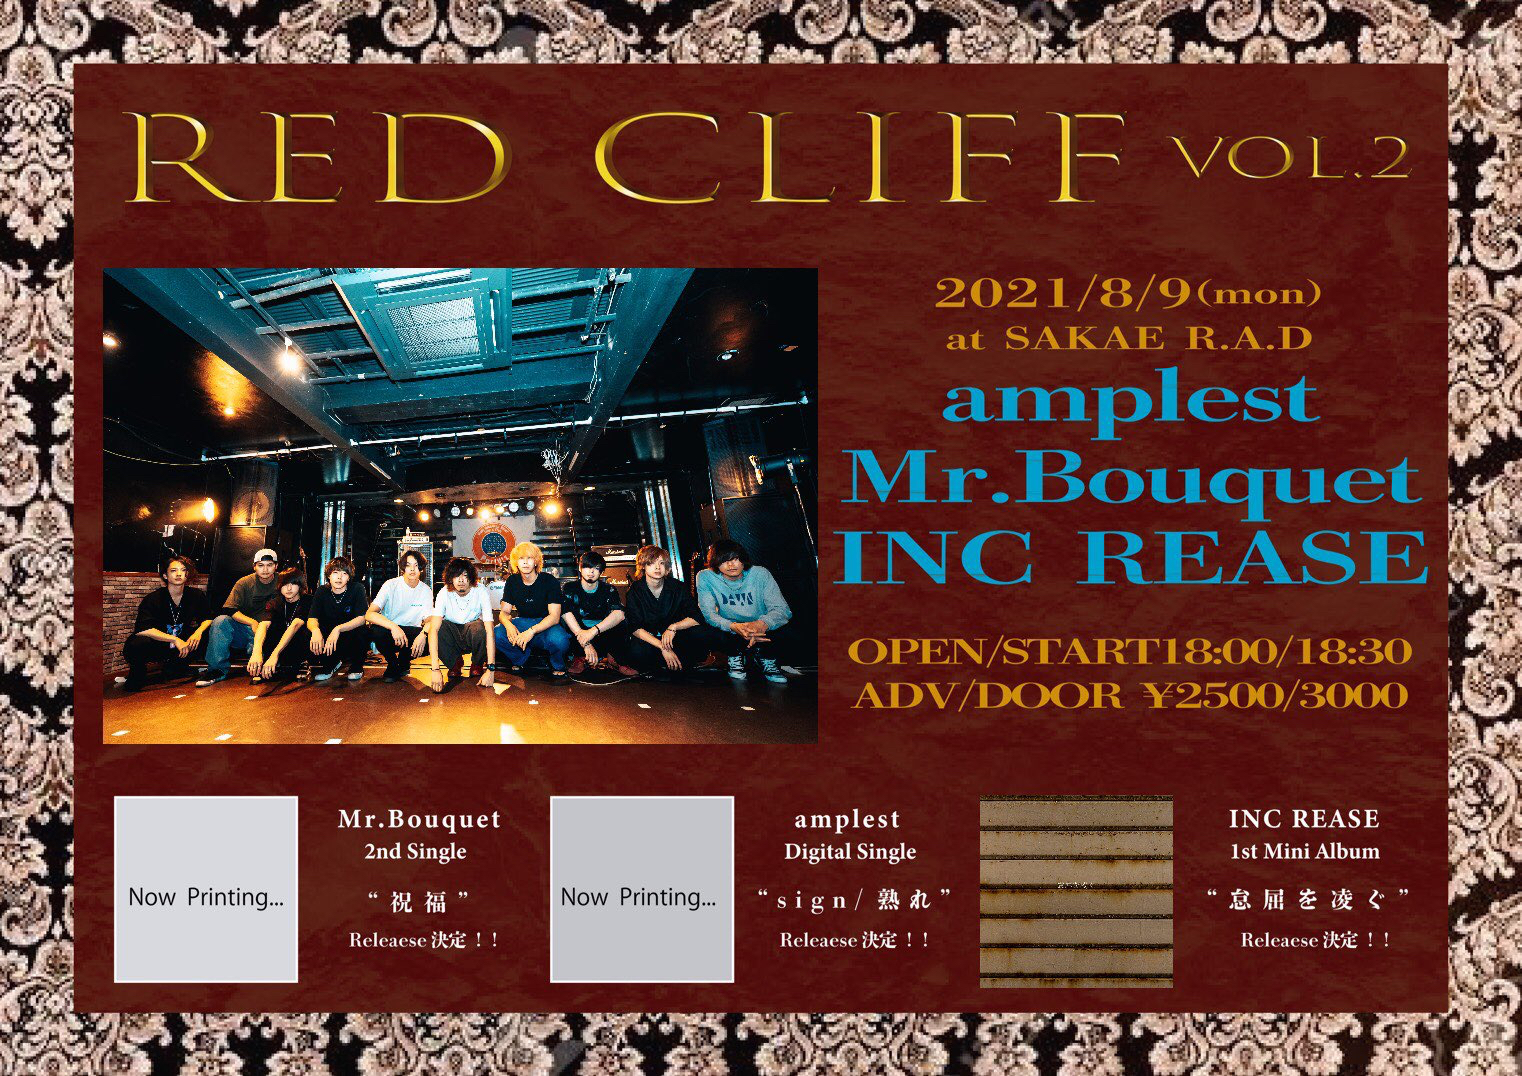 RED CLIEF VOL.2